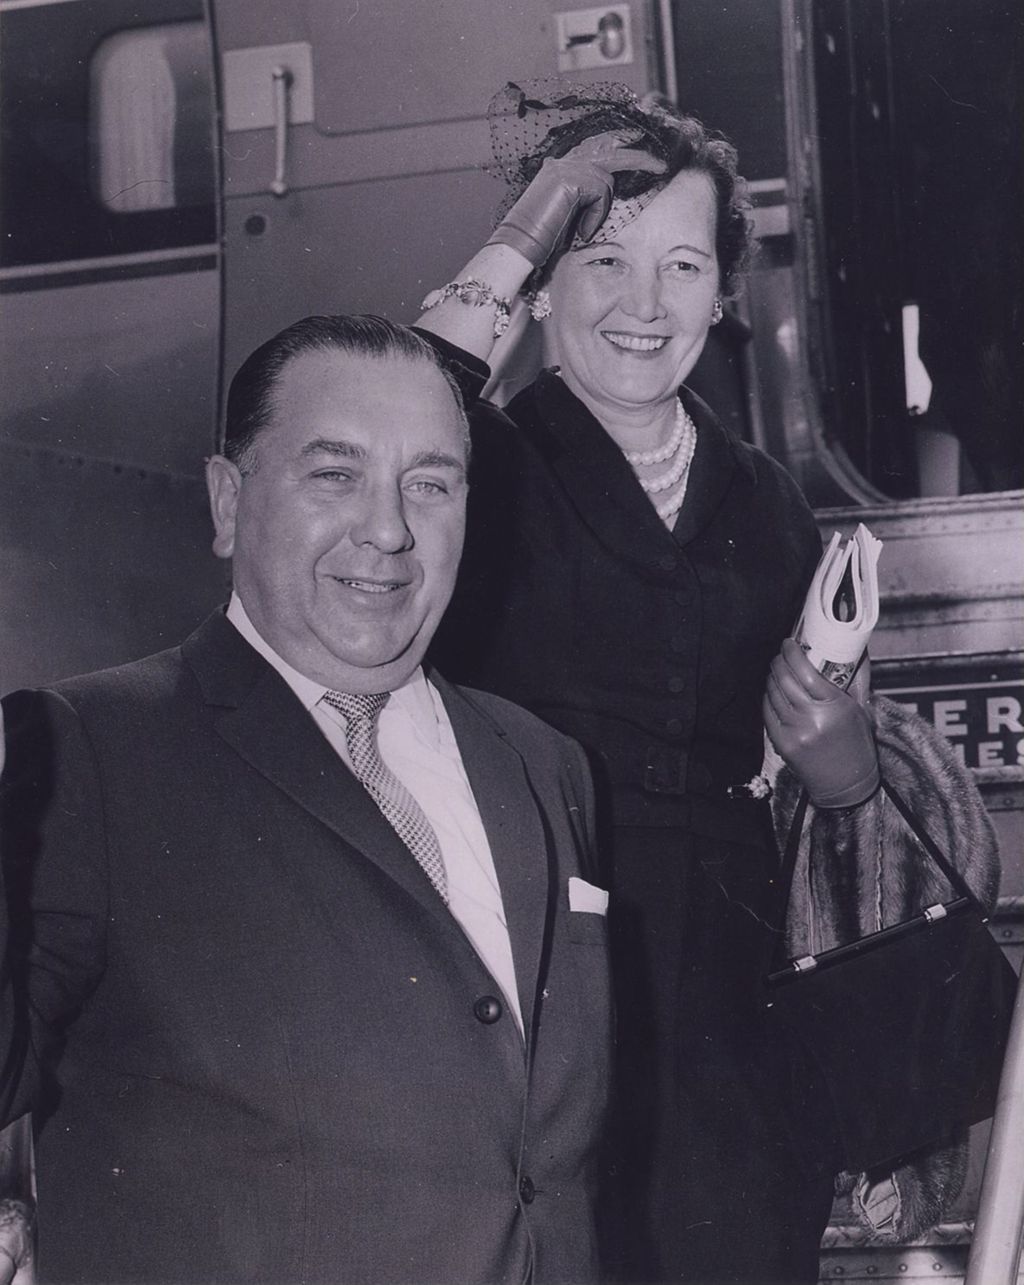 Miniature of Richard J. Daley and Eleanor Daley boarding a plane